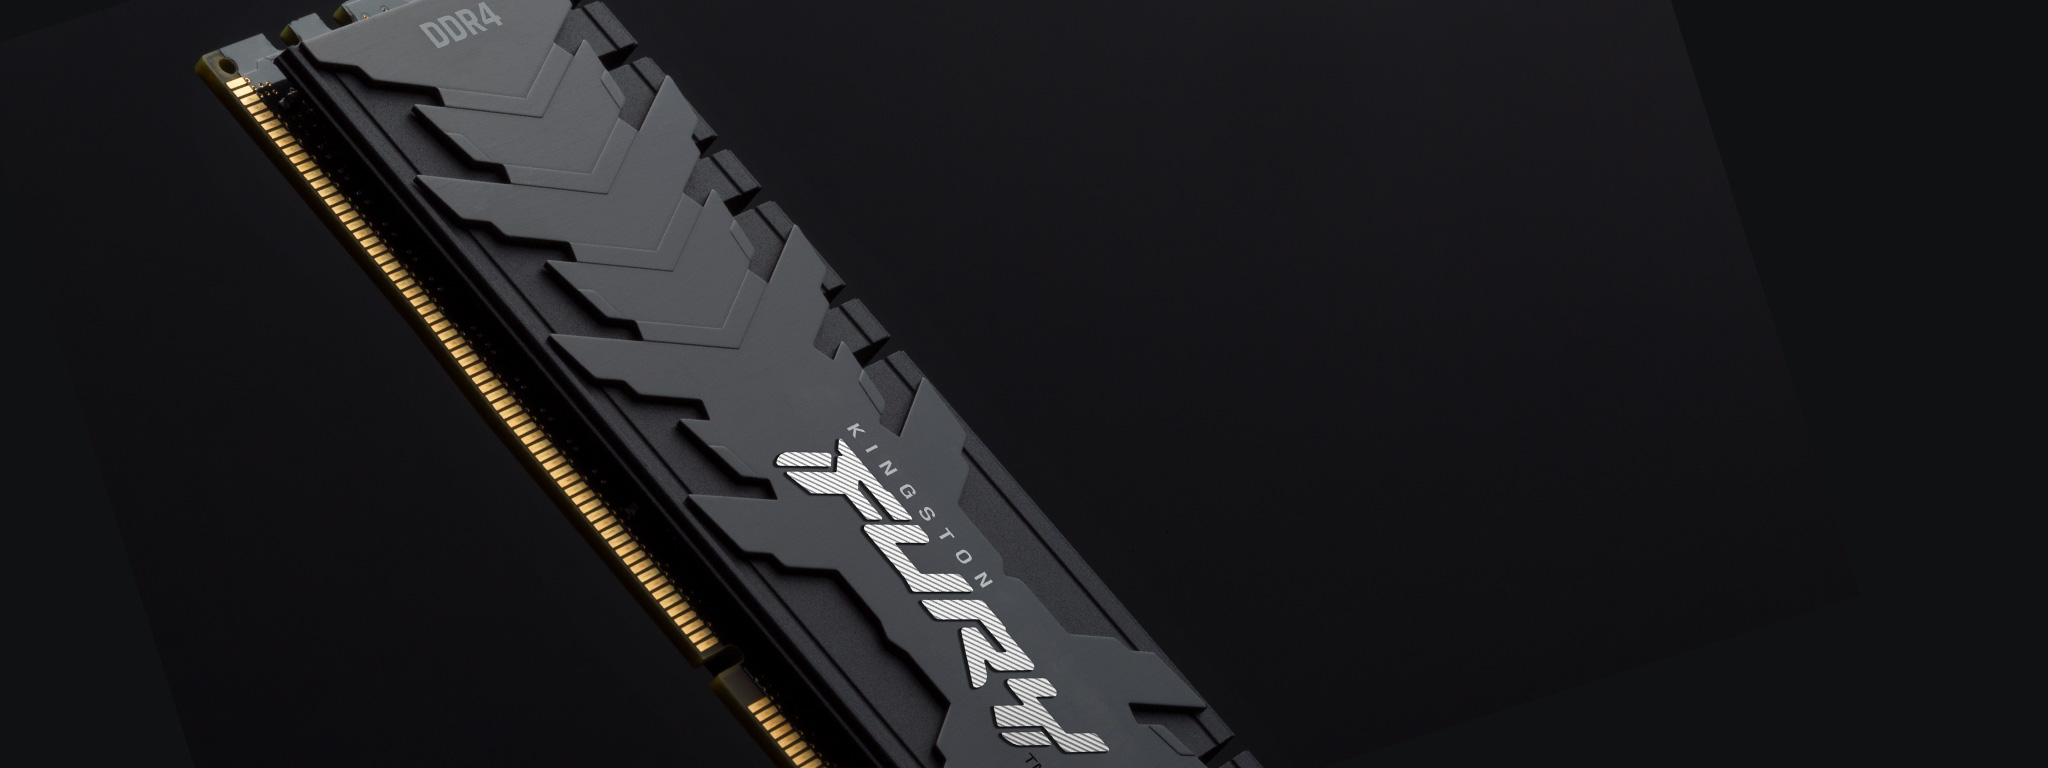 Half of a Kingston FURY Renegade DDR4 memory module is visible against a solid black background